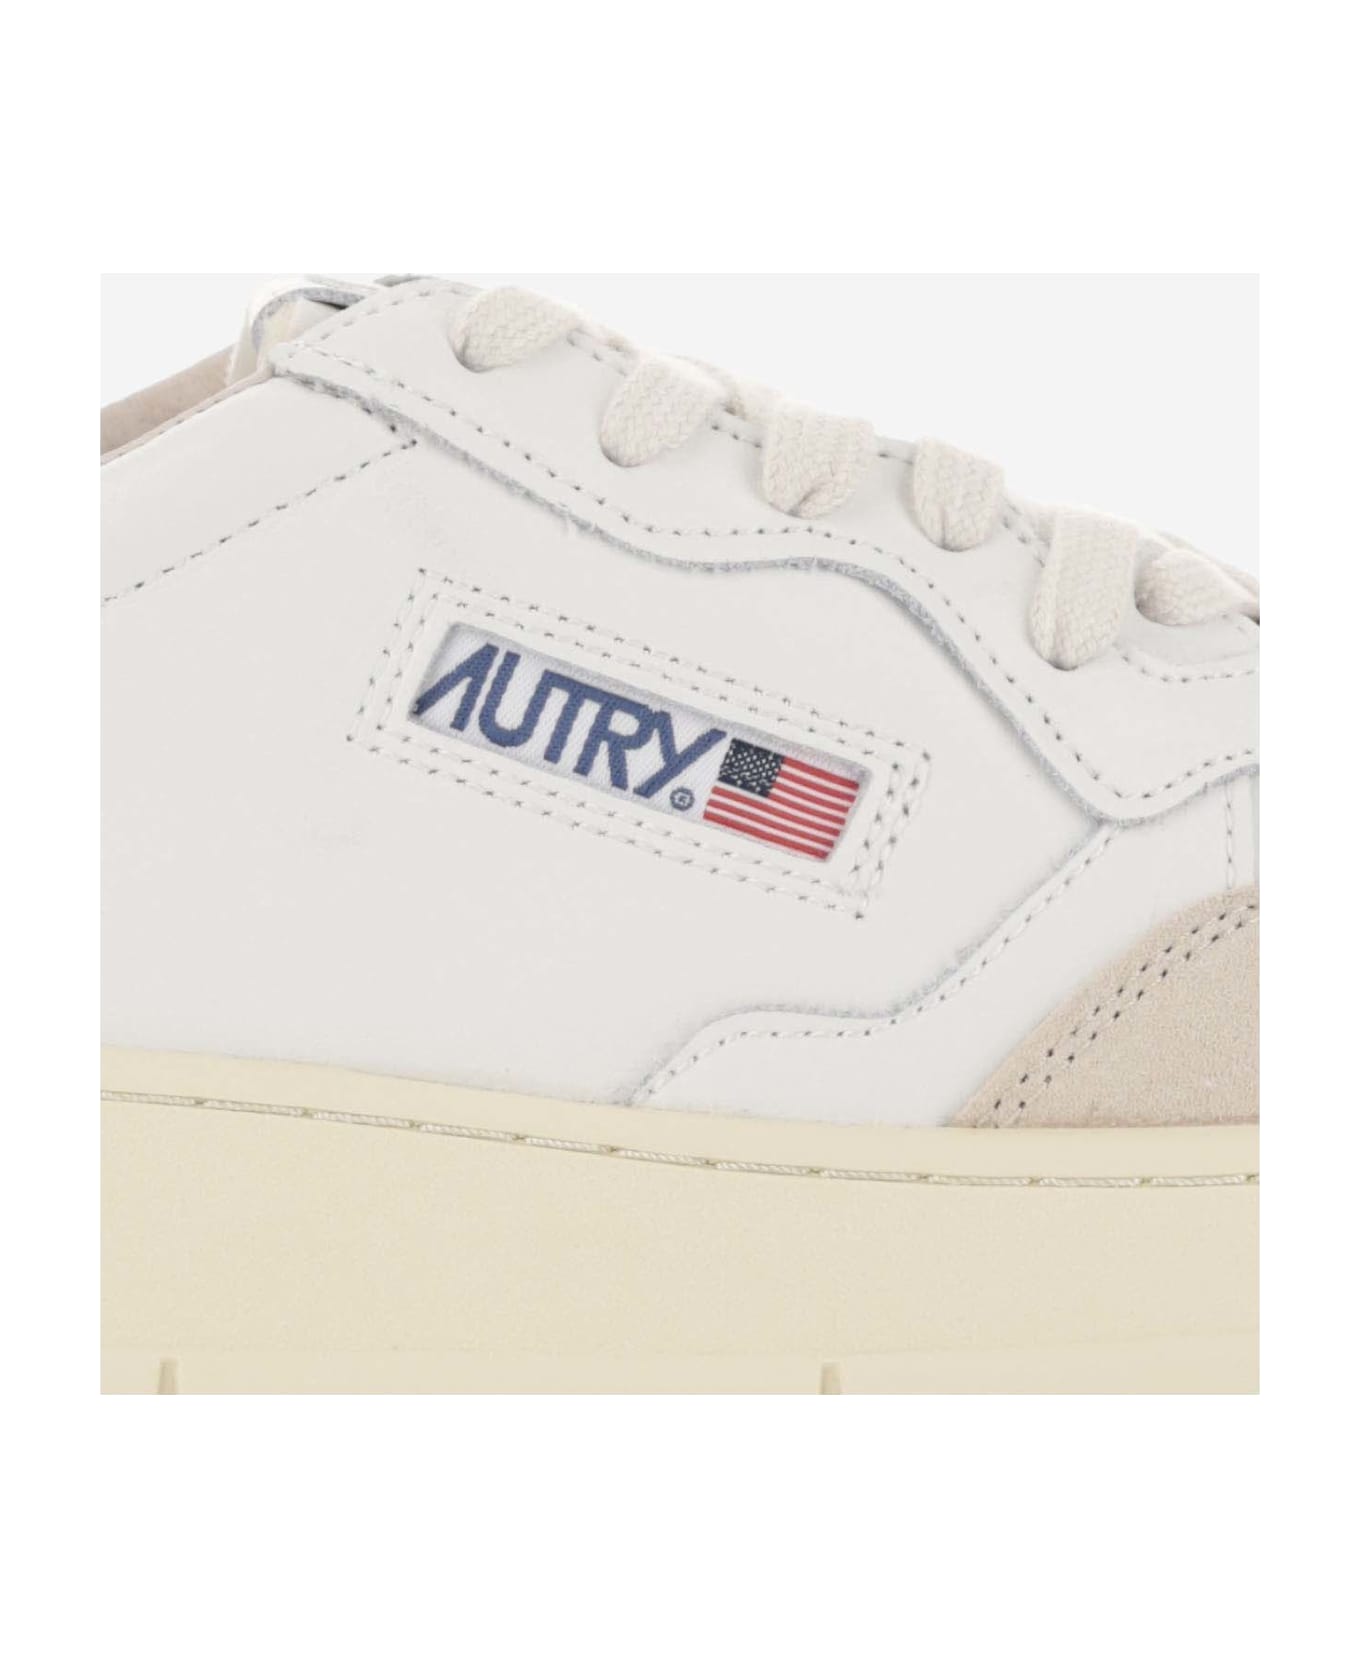 Autry Low Medalist Sneakers - Red